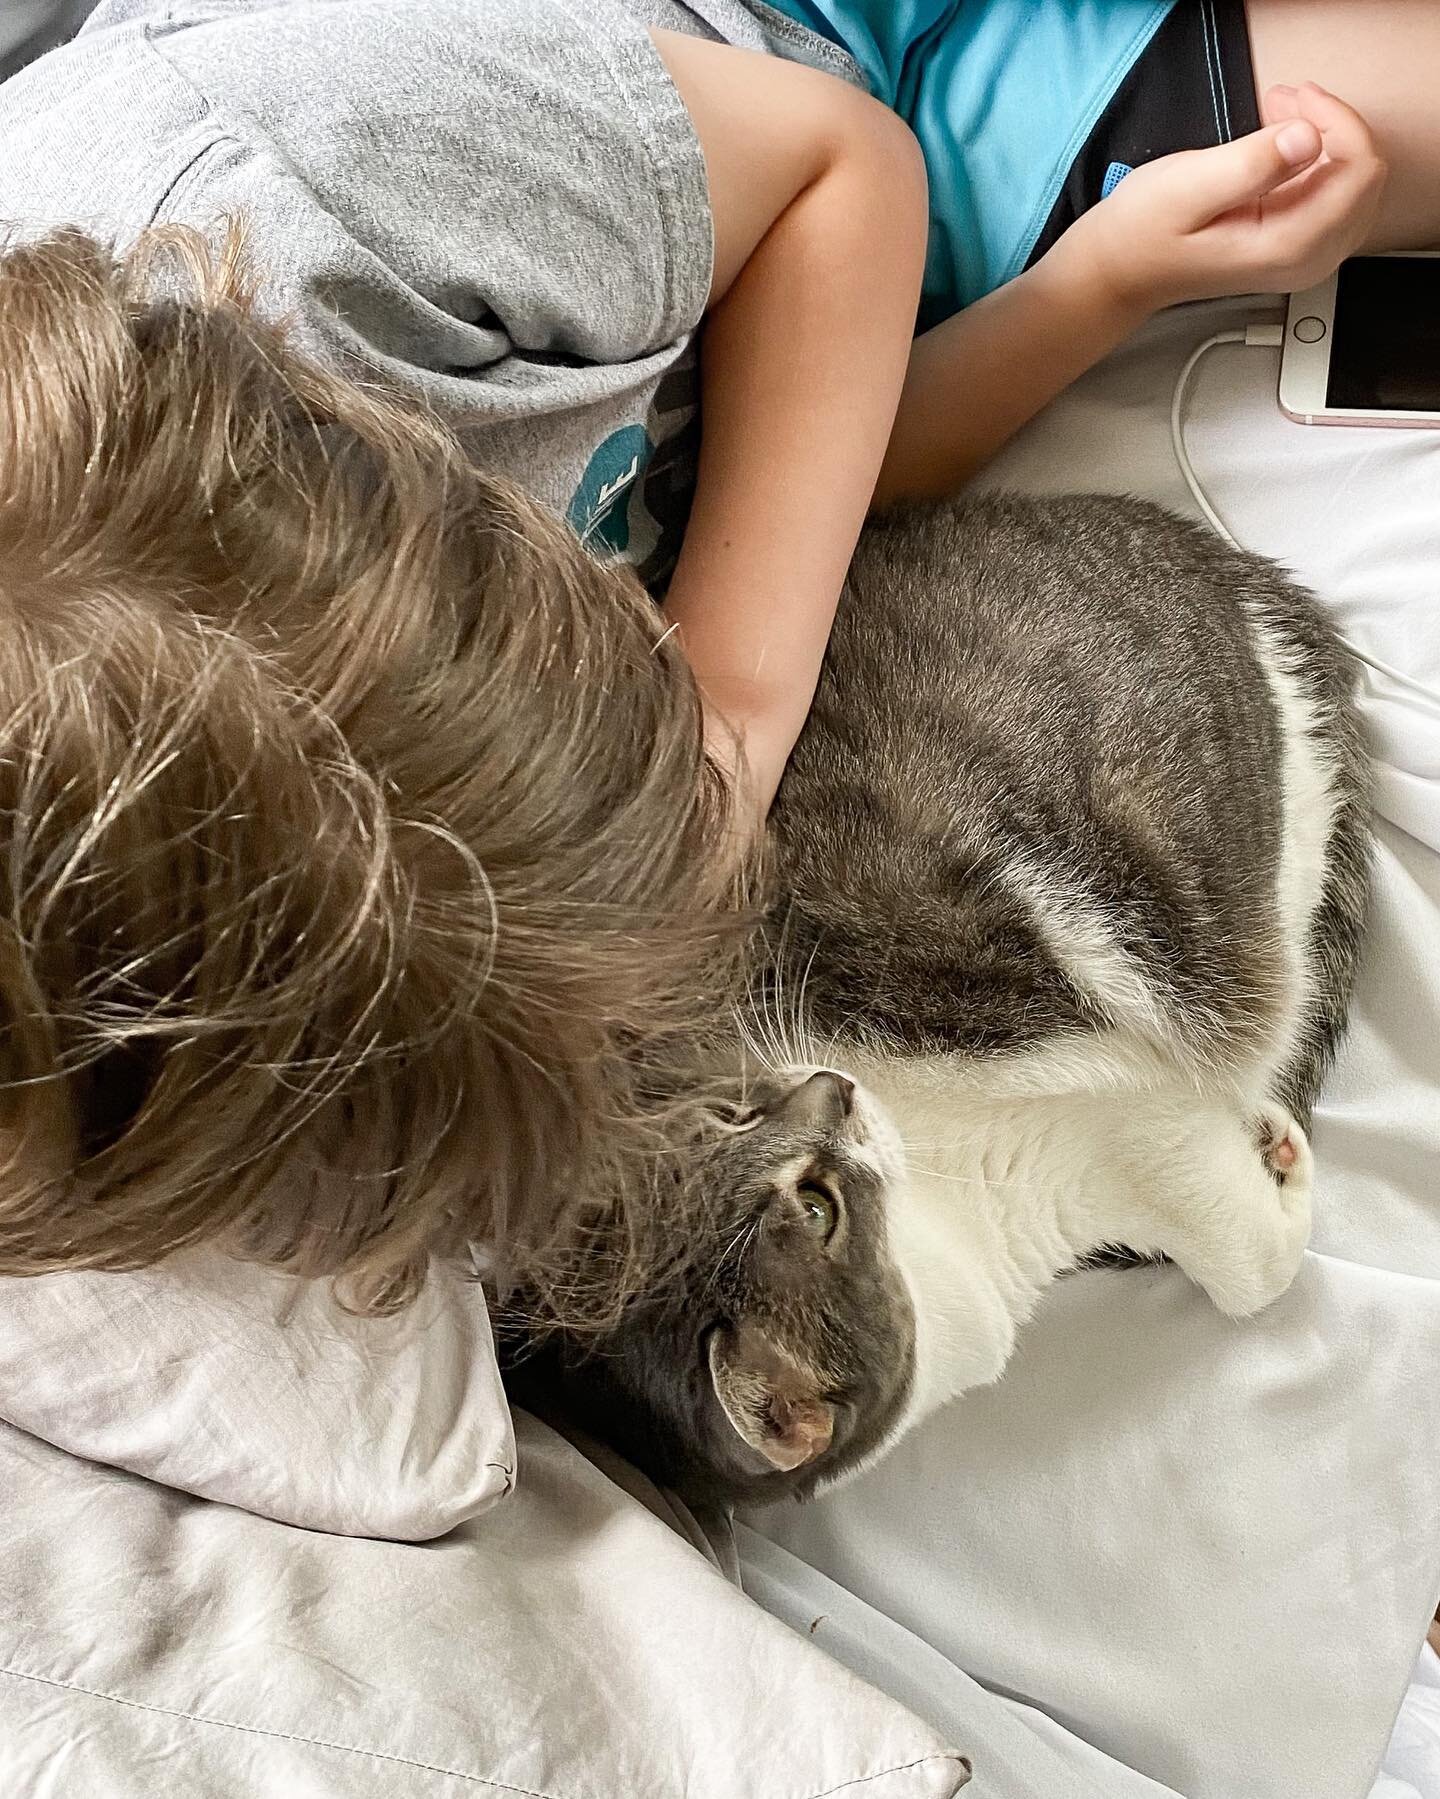 meet vossi // this is our therapy cat. she loves us all and is totally spoiled. she also has the uncanny ability to know if we are struggling with ptsd. sometimes this manifests as extra snuggles (like now) while other times it means she gives us a l